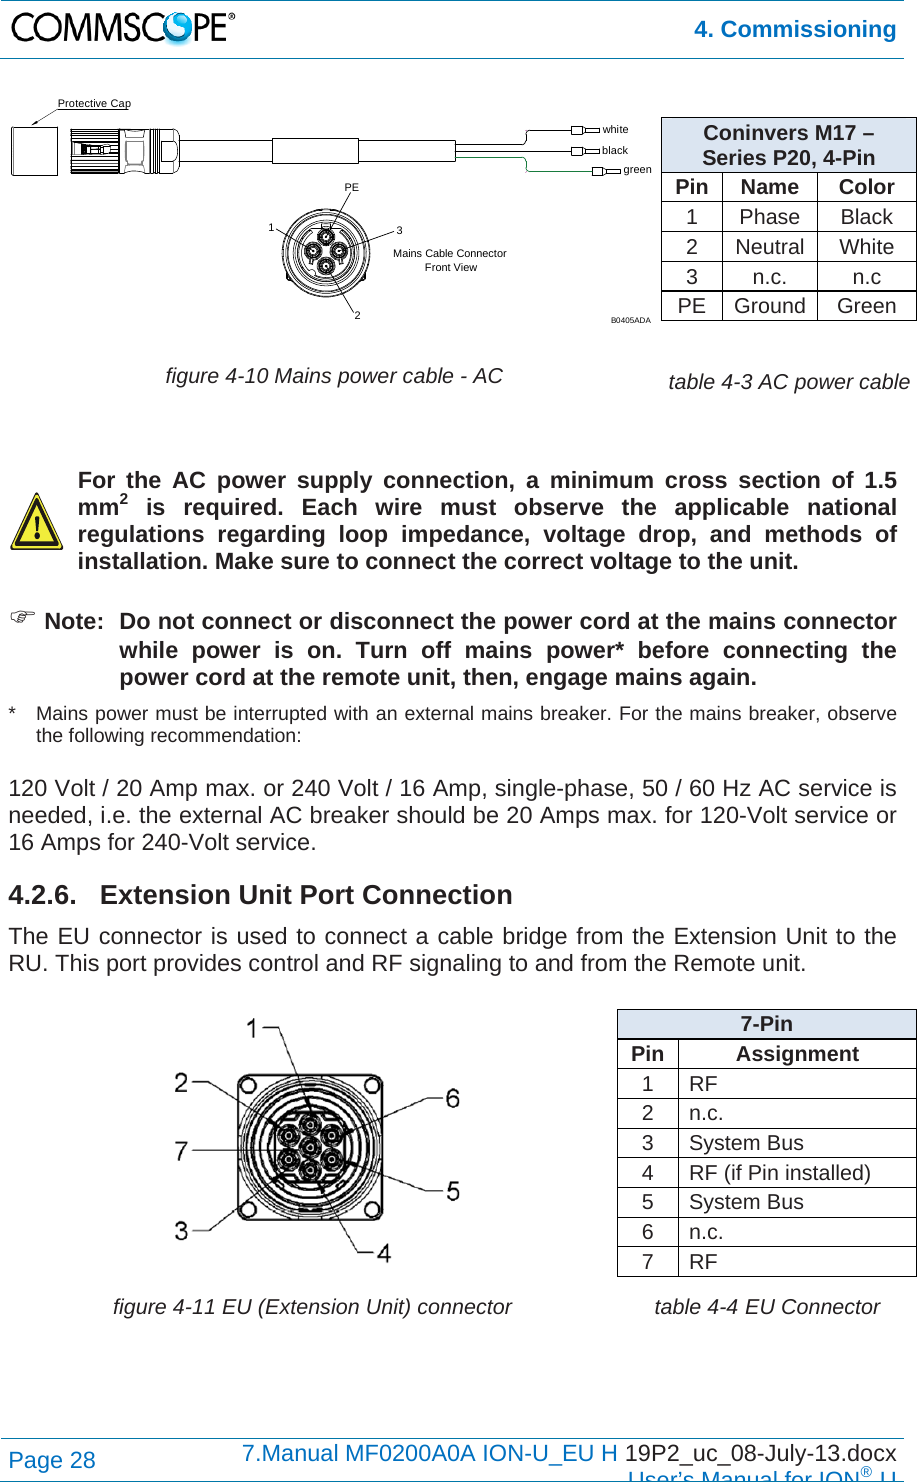  4. Commissioning Page 28  7.Manual MF0200A0A ION-U_EU H 19P2_uc_08-July-13.docx  User’s Manual for ION®U Coninvers M17 –Series P20, 4-Pin Pin Name  Color 1 Phase Black 2 Neutral White 3 n.c.  n.c PE Ground Green  figure 4-10 Mains power cable - AC  table 4-3 AC power cable    For the AC power supply connection, a minimum cross section of 1.5 mm2 is required. Each wire must observe the applicable national regulations regarding loop impedance, voltage drop, and methods of installation. Make sure to connect the correct voltage to the unit.   Note:  Do not connect or disconnect the power cord at the mains connector while power is on. Turn off mains power* before connecting the power cord at the remote unit, then, engage mains again. *   Mains power must be interrupted with an external mains breaker. For the mains breaker, observe the following recommendation:  120 Volt / 20 Amp max. or 240 Volt / 16 Amp, single-phase, 50 / 60 Hz AC service is needed, i.e. the external AC breaker should be 20 Amps max. for 120-Volt service or 16 Amps for 240-Volt service. 4.2.6.  Extension Unit Port Connection The EU connector is used to connect a cable bridge from the Extension Unit to the RU. This port provides control and RF signaling to and from the Remote unit.   7-Pin  Pin Assignment 1 RF 2 n.c. 3 System Bus 4  RF (if Pin installed) 5 System Bus 6  n.c. 7 RF  figure 4-11 EU (Extension Unit) connector  table 4-4 EU Connector   whiteblackgreenProtective CapPE123Mains Cable ConnectorFront ViewB0405ADA